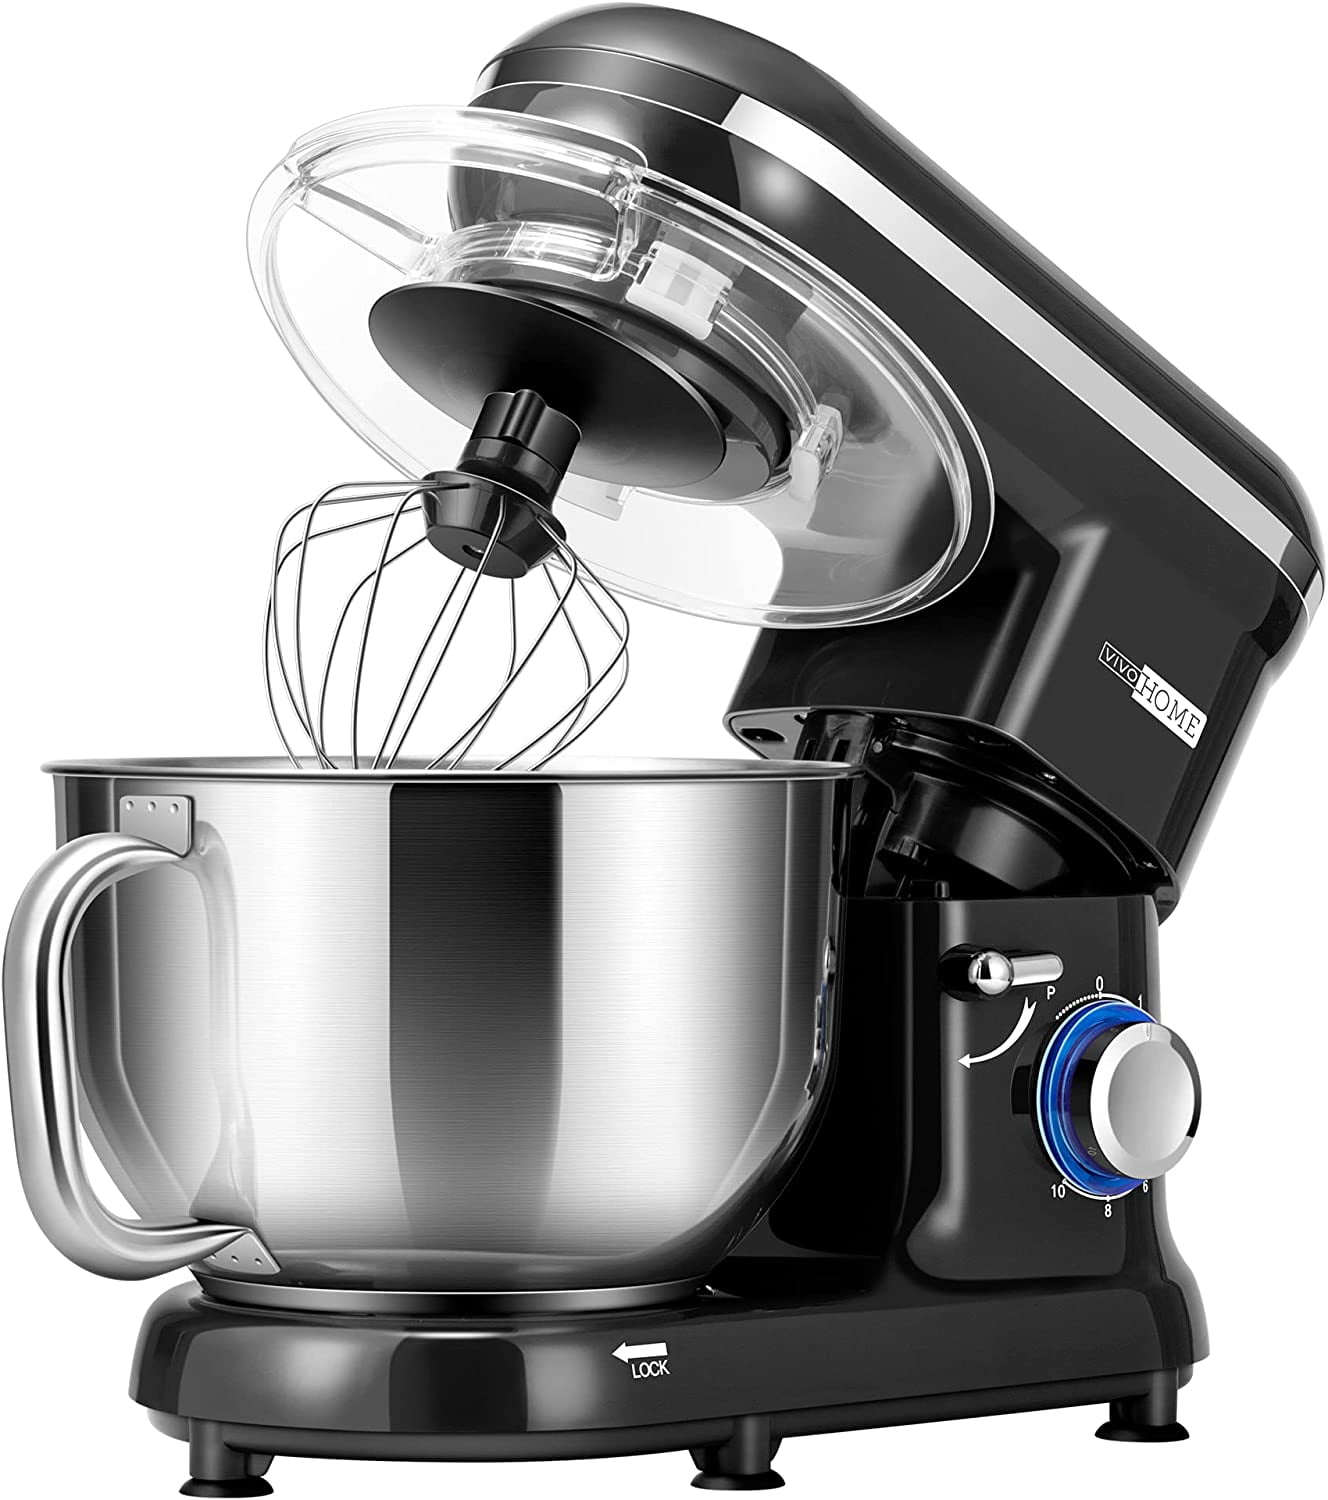 Aucma Stand Mixer,1100W 6-Speed 7L Tilt-Head Food Mixer, Electric Kitchen  Mixer with Dough Hook, Wire Whip & Beater,1 Year Warranty(Silver) price in  UAE,  UAE